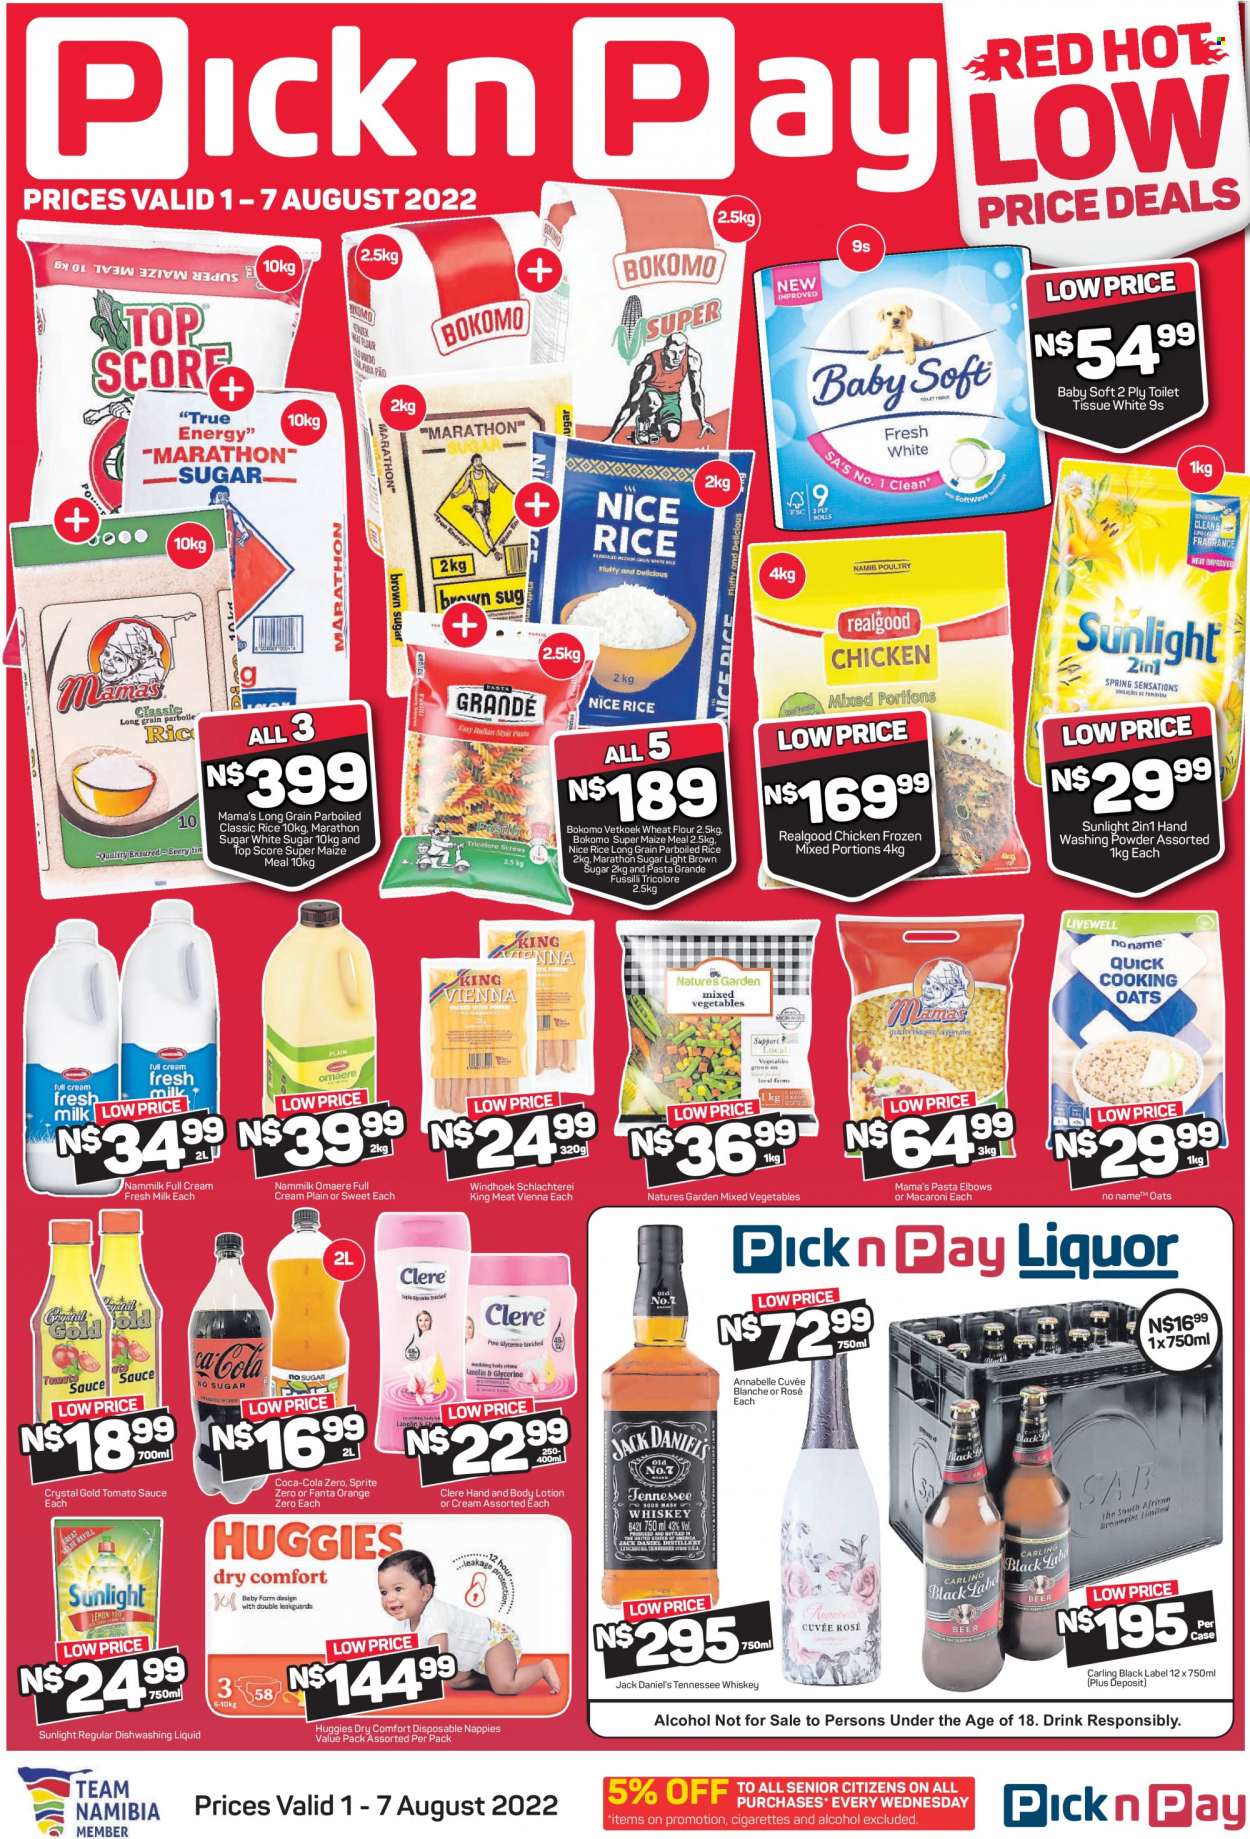 Pick n Pay catalogue  - 01/08/2022 - 07/08/2022 - Sales products - oranges, Jack Daniel's, macaroni, sauce, Mama's, milk, mixed vegetables, Natures Garden, cane sugar, flour, wheat flour, oats, maize meal, tomato sauce, rice, parboiled rice, Pasta Grandé, Coca-Cola, Sprite, Fanta, Coca-Cola zero, Cuvée, alcohol, rosé wine, Tennessee Whiskey, whiskey, whisky, Carling, Huggies, nappies, Baby Soft, laundry powder, Sunlight, dishwashing liquid, body lotion, Clere. Page 1.